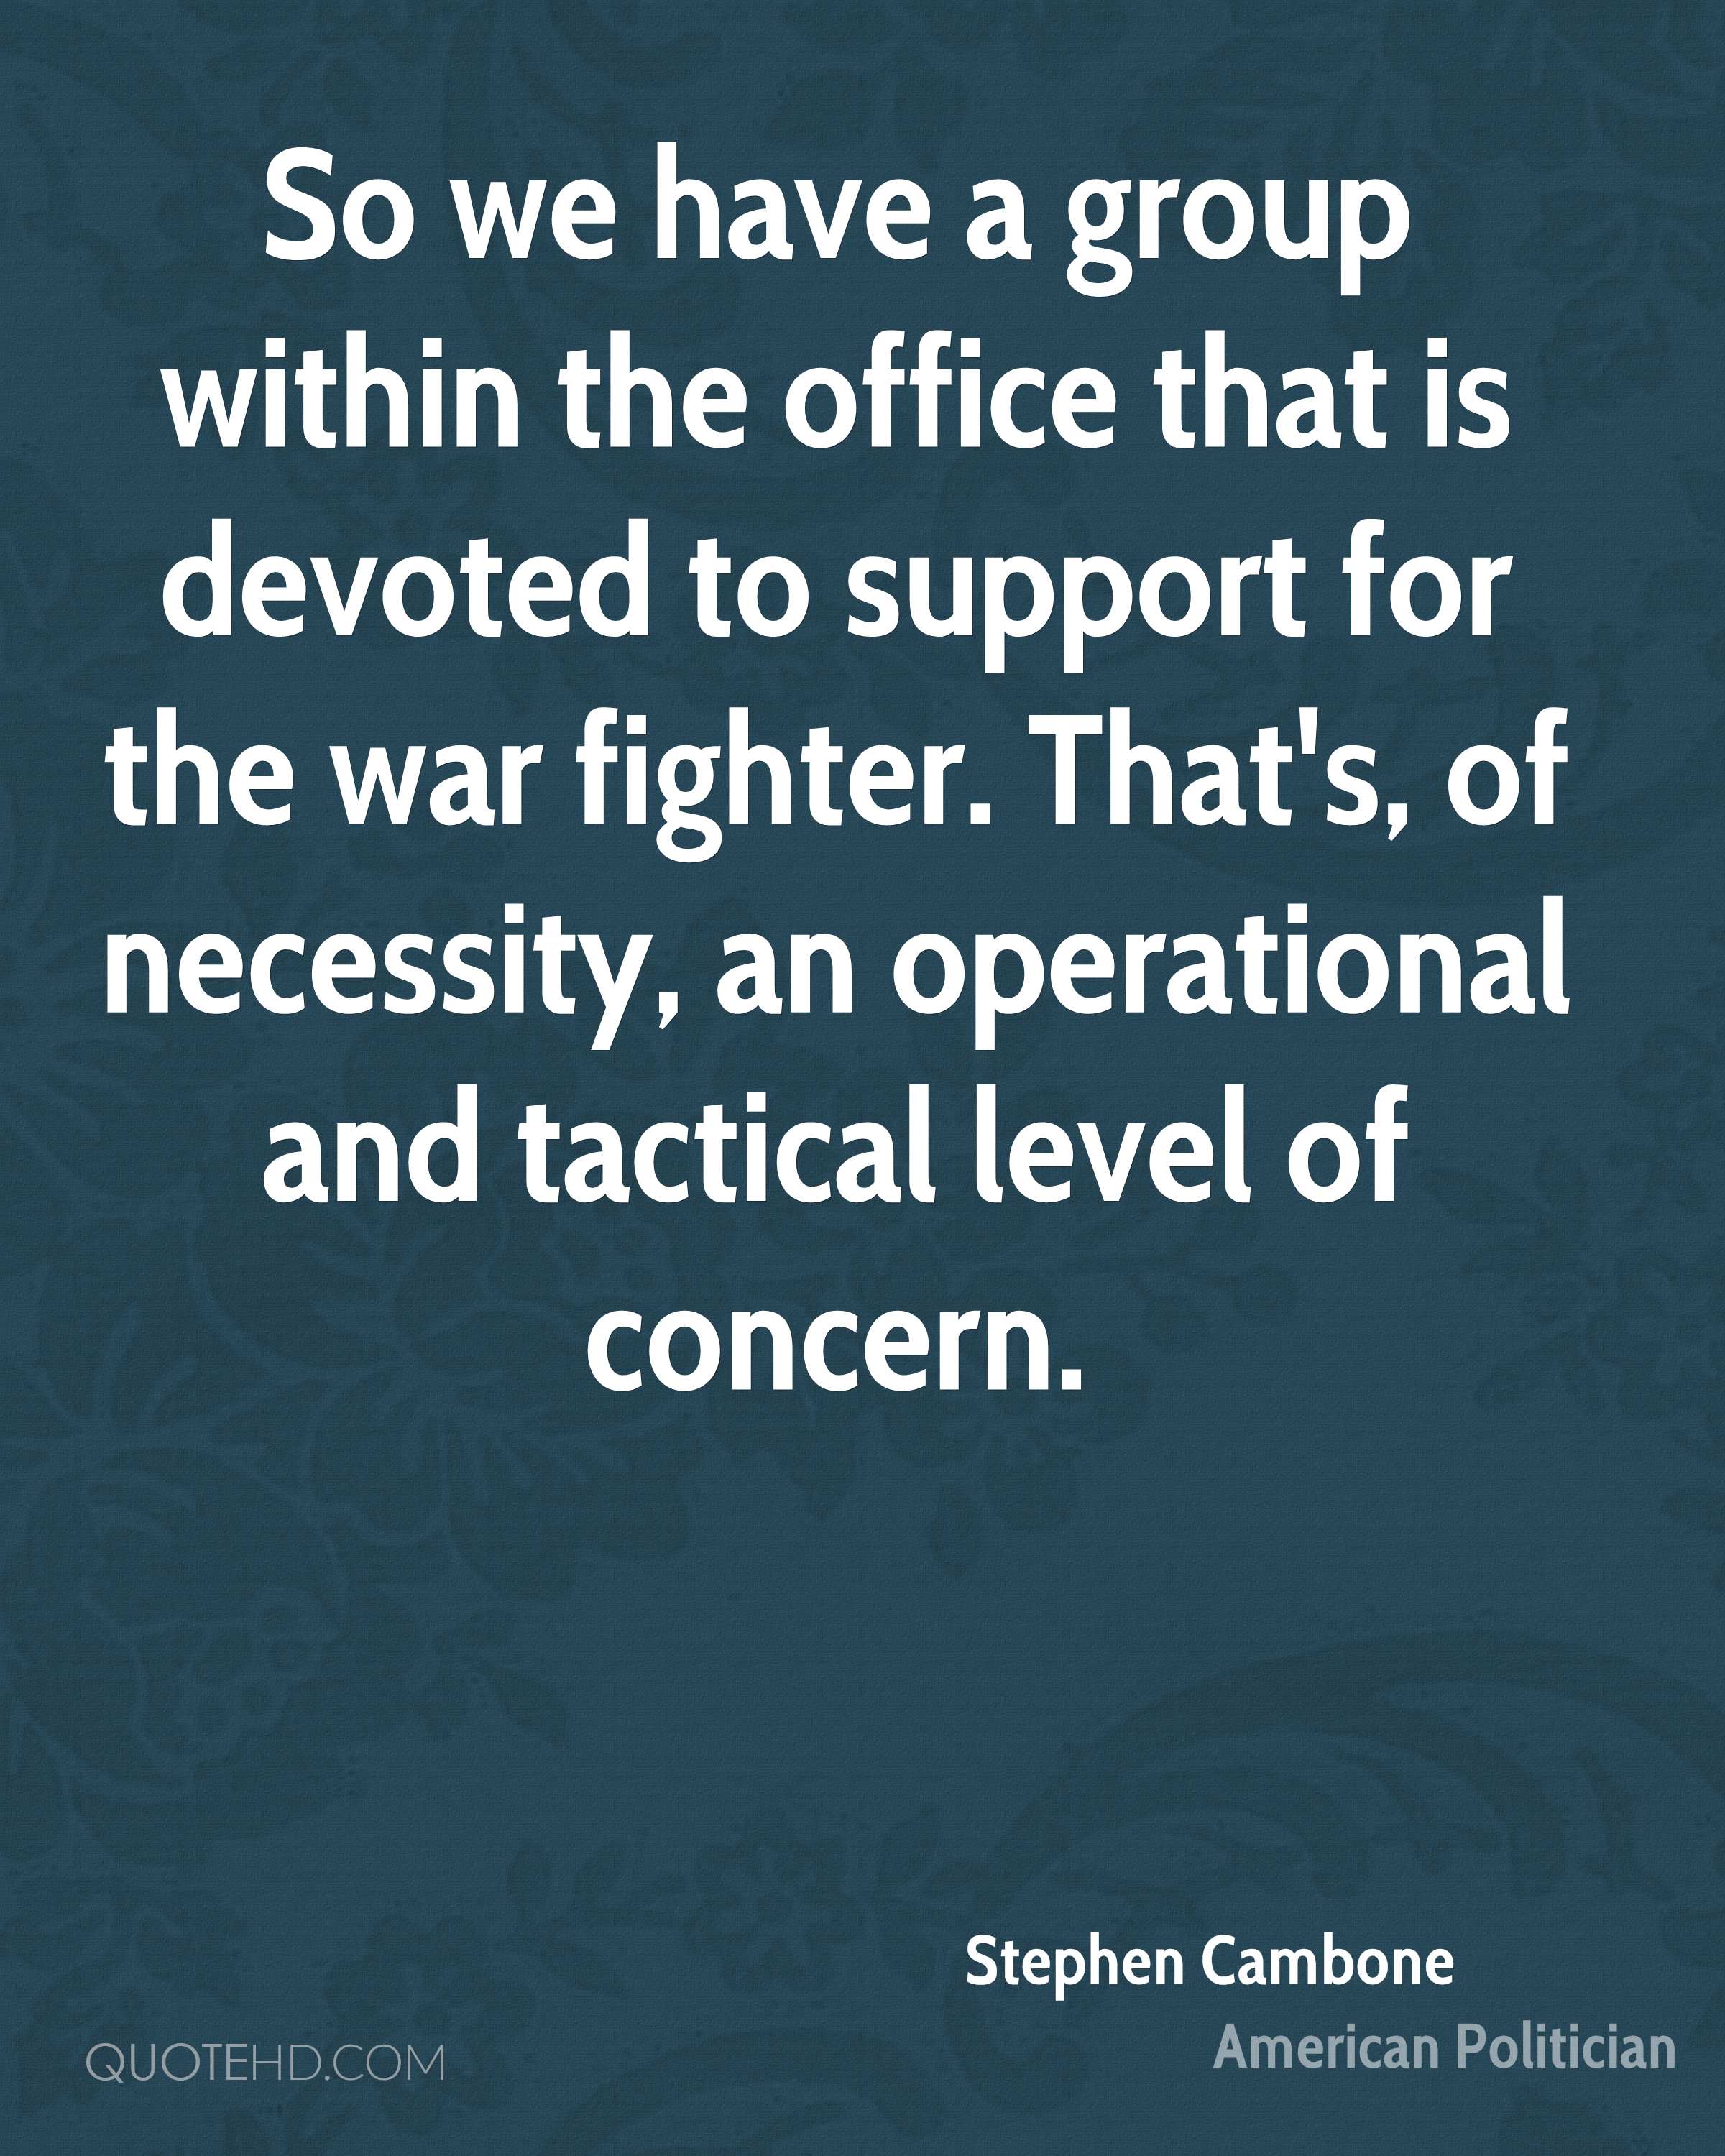 So we have a group within the office that is devoted to support for the war fighter. That's, of ... level of concern. Stephen Cambone